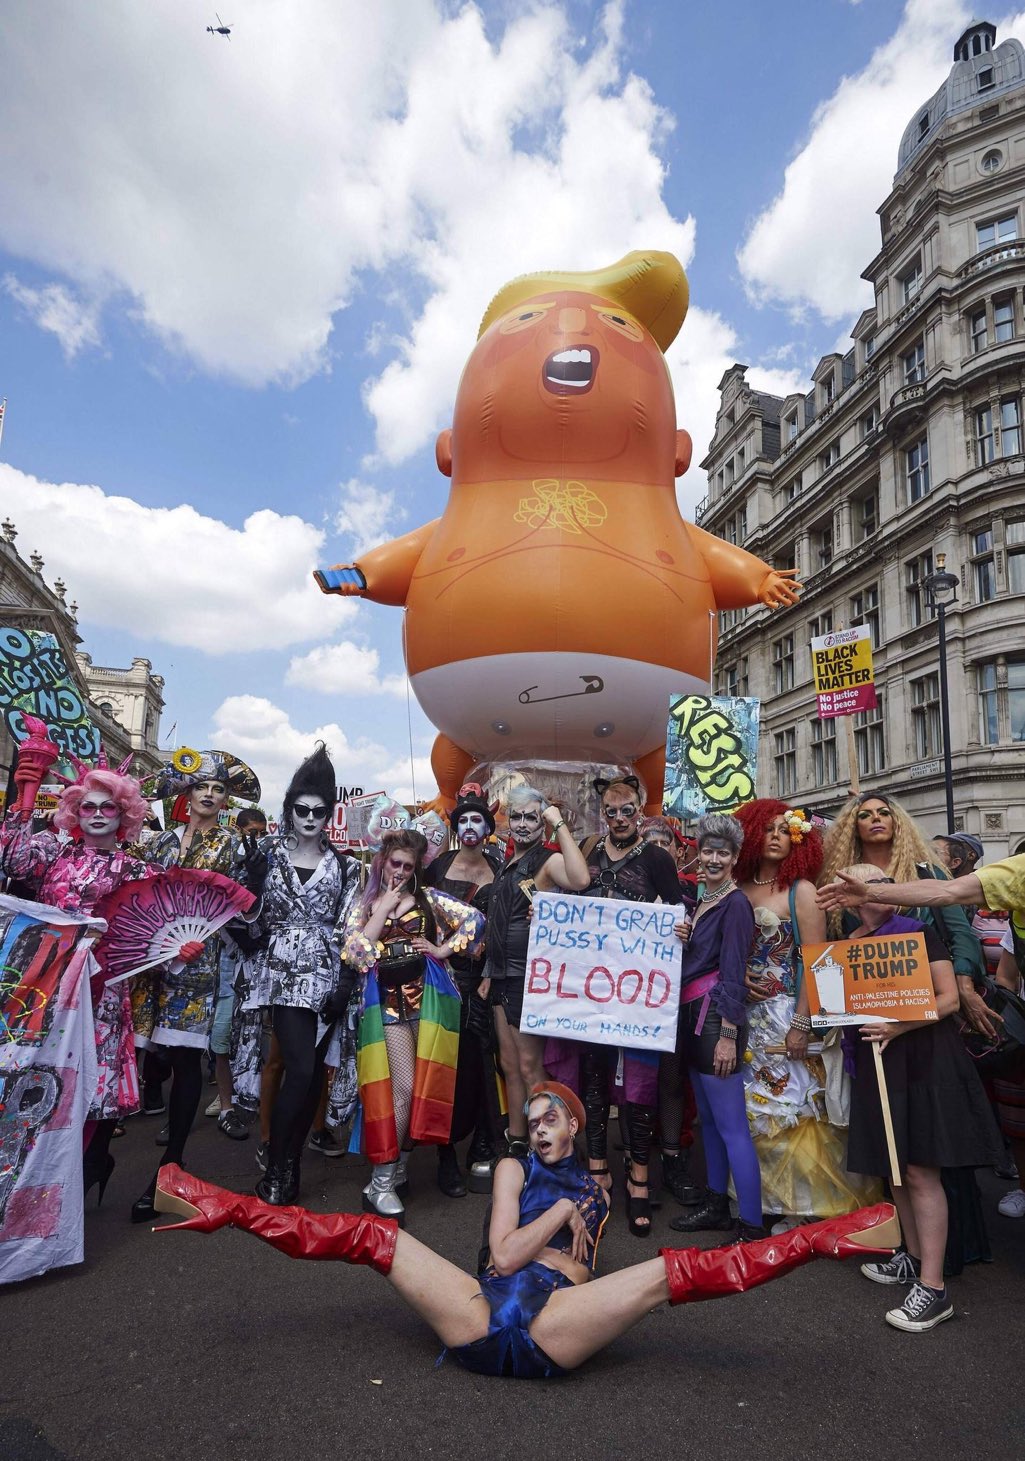 trump balloon gay - Black 0974 Lives . Matter No justice No peace Imd Don'T Grabs Pussy With Blood Trump AntiPalestine Policies Islamophoria & Racism On Your Hands!